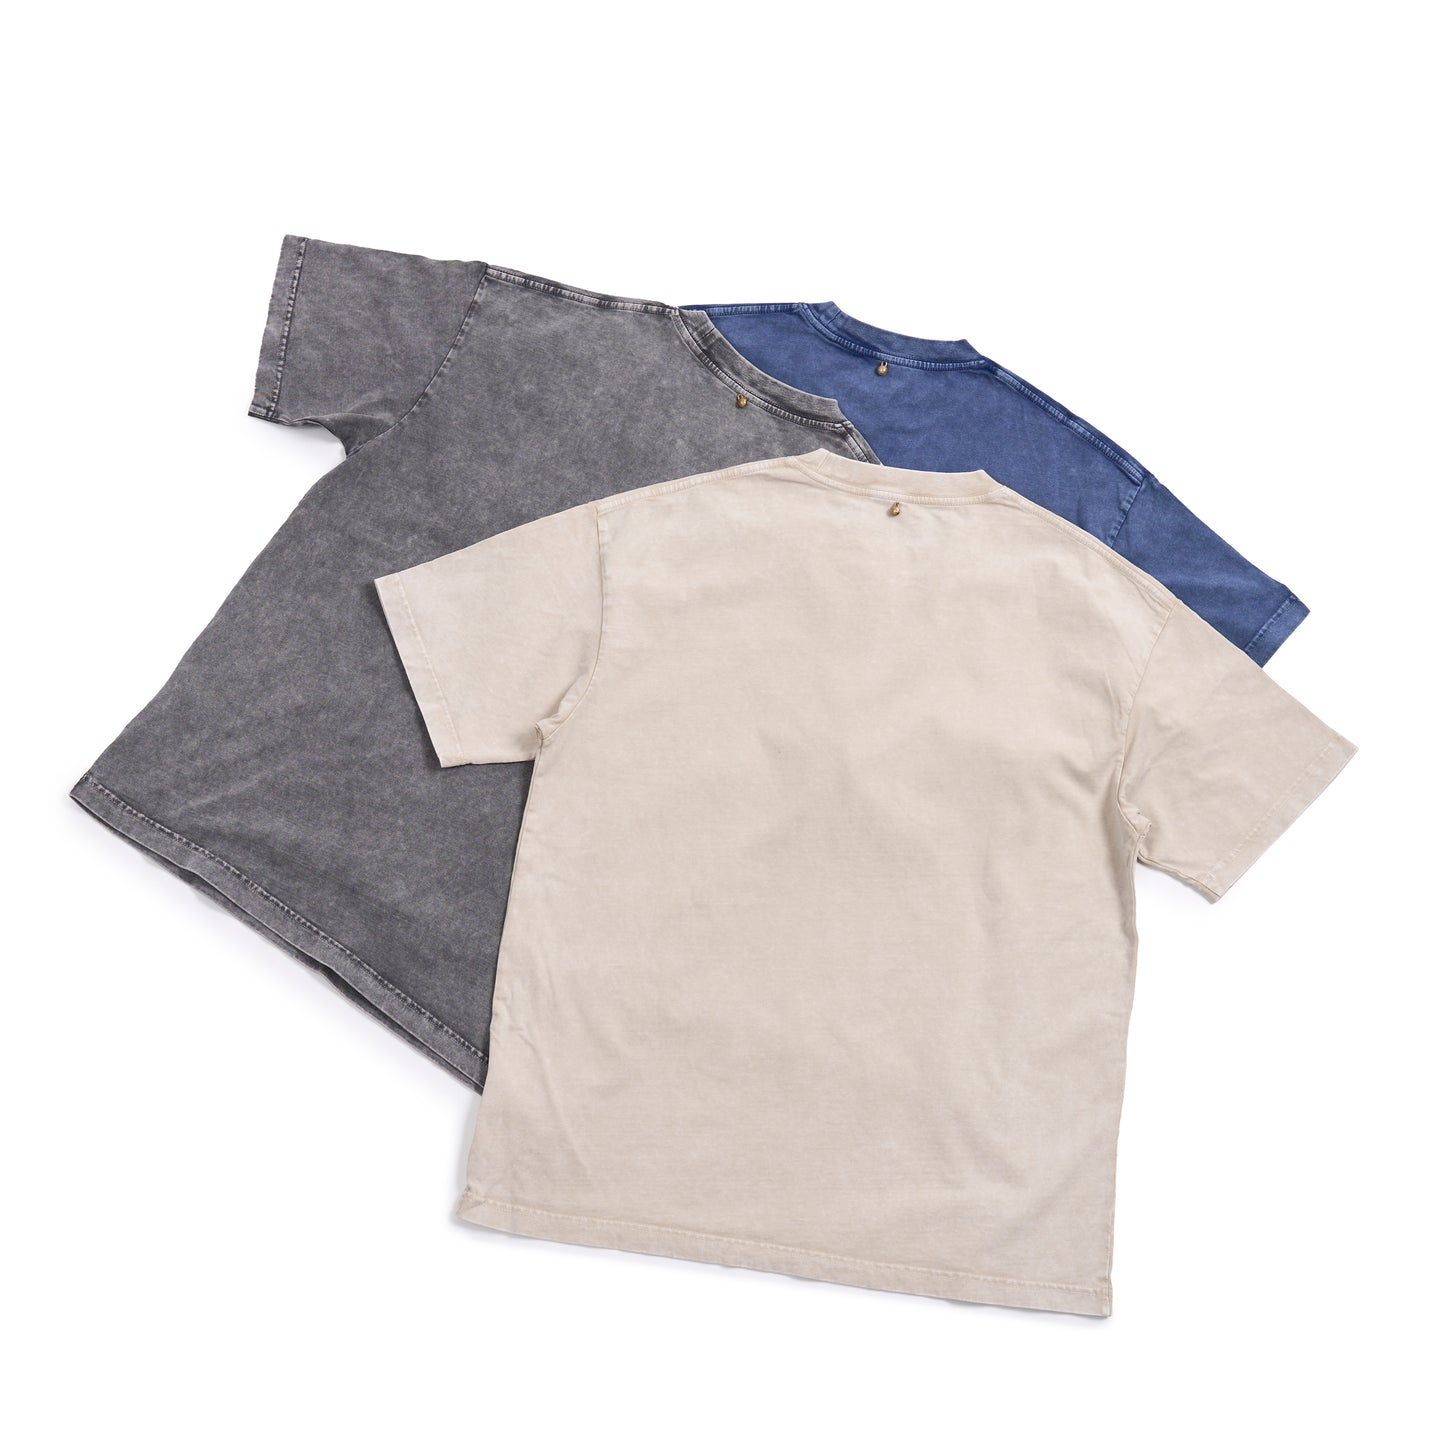 【Limited Edition】限定款 Stone Washed Oversize T-Shirt【狸奴】